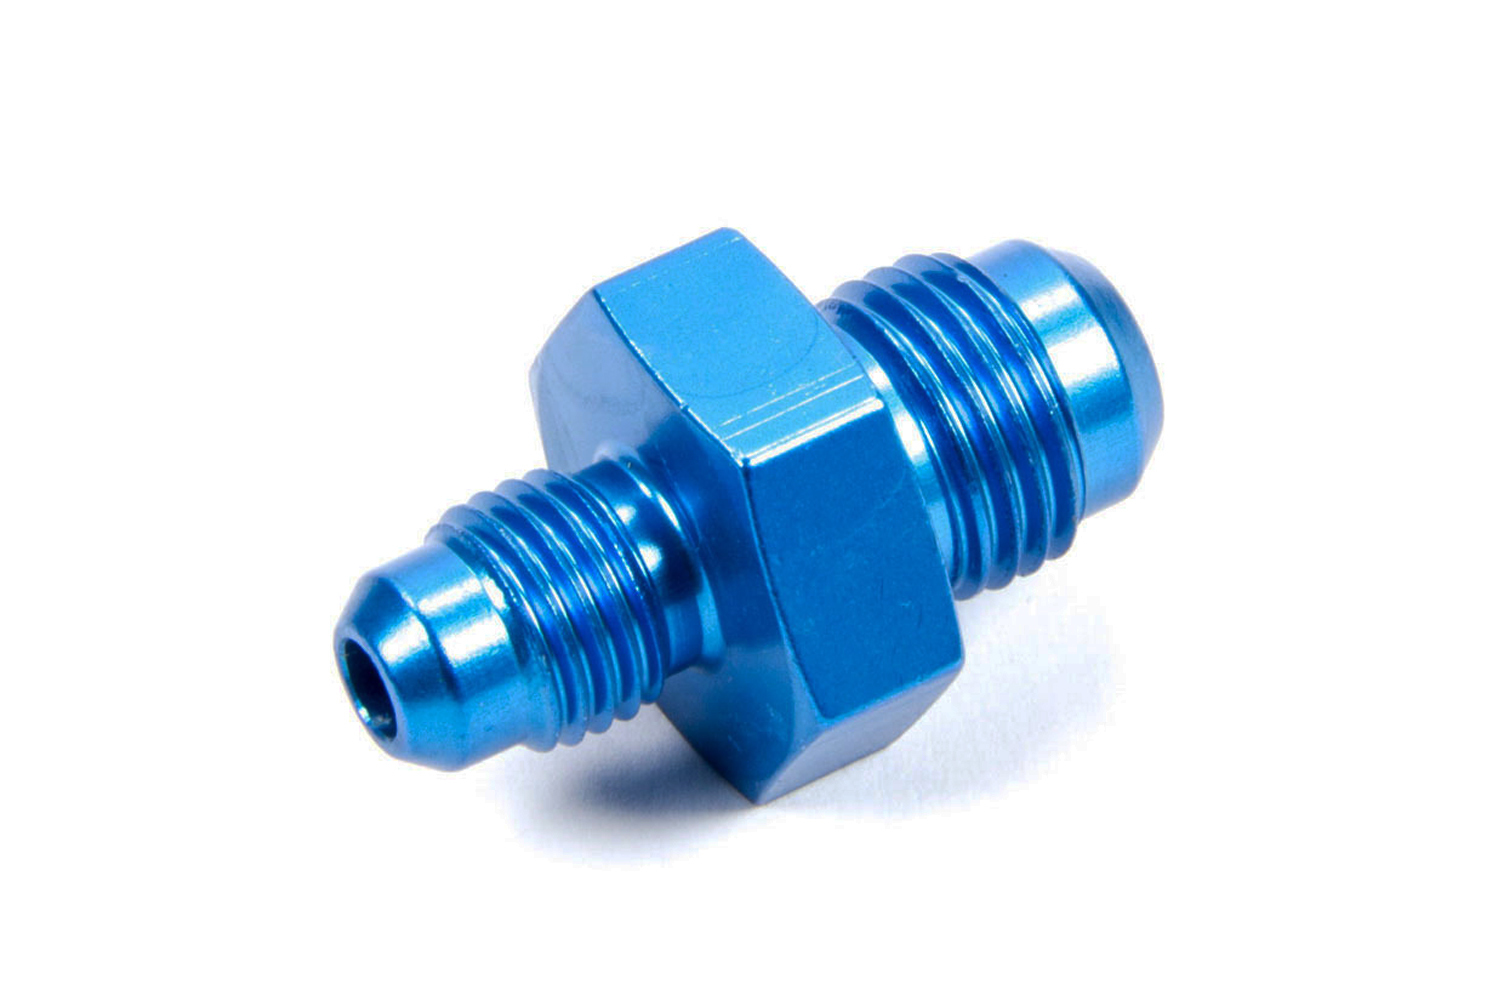 Fragola 491908 Fitting, Adapter, Straight, 8 AN Male to 4 AN Male, Aluminum, Blue Anodized, Each